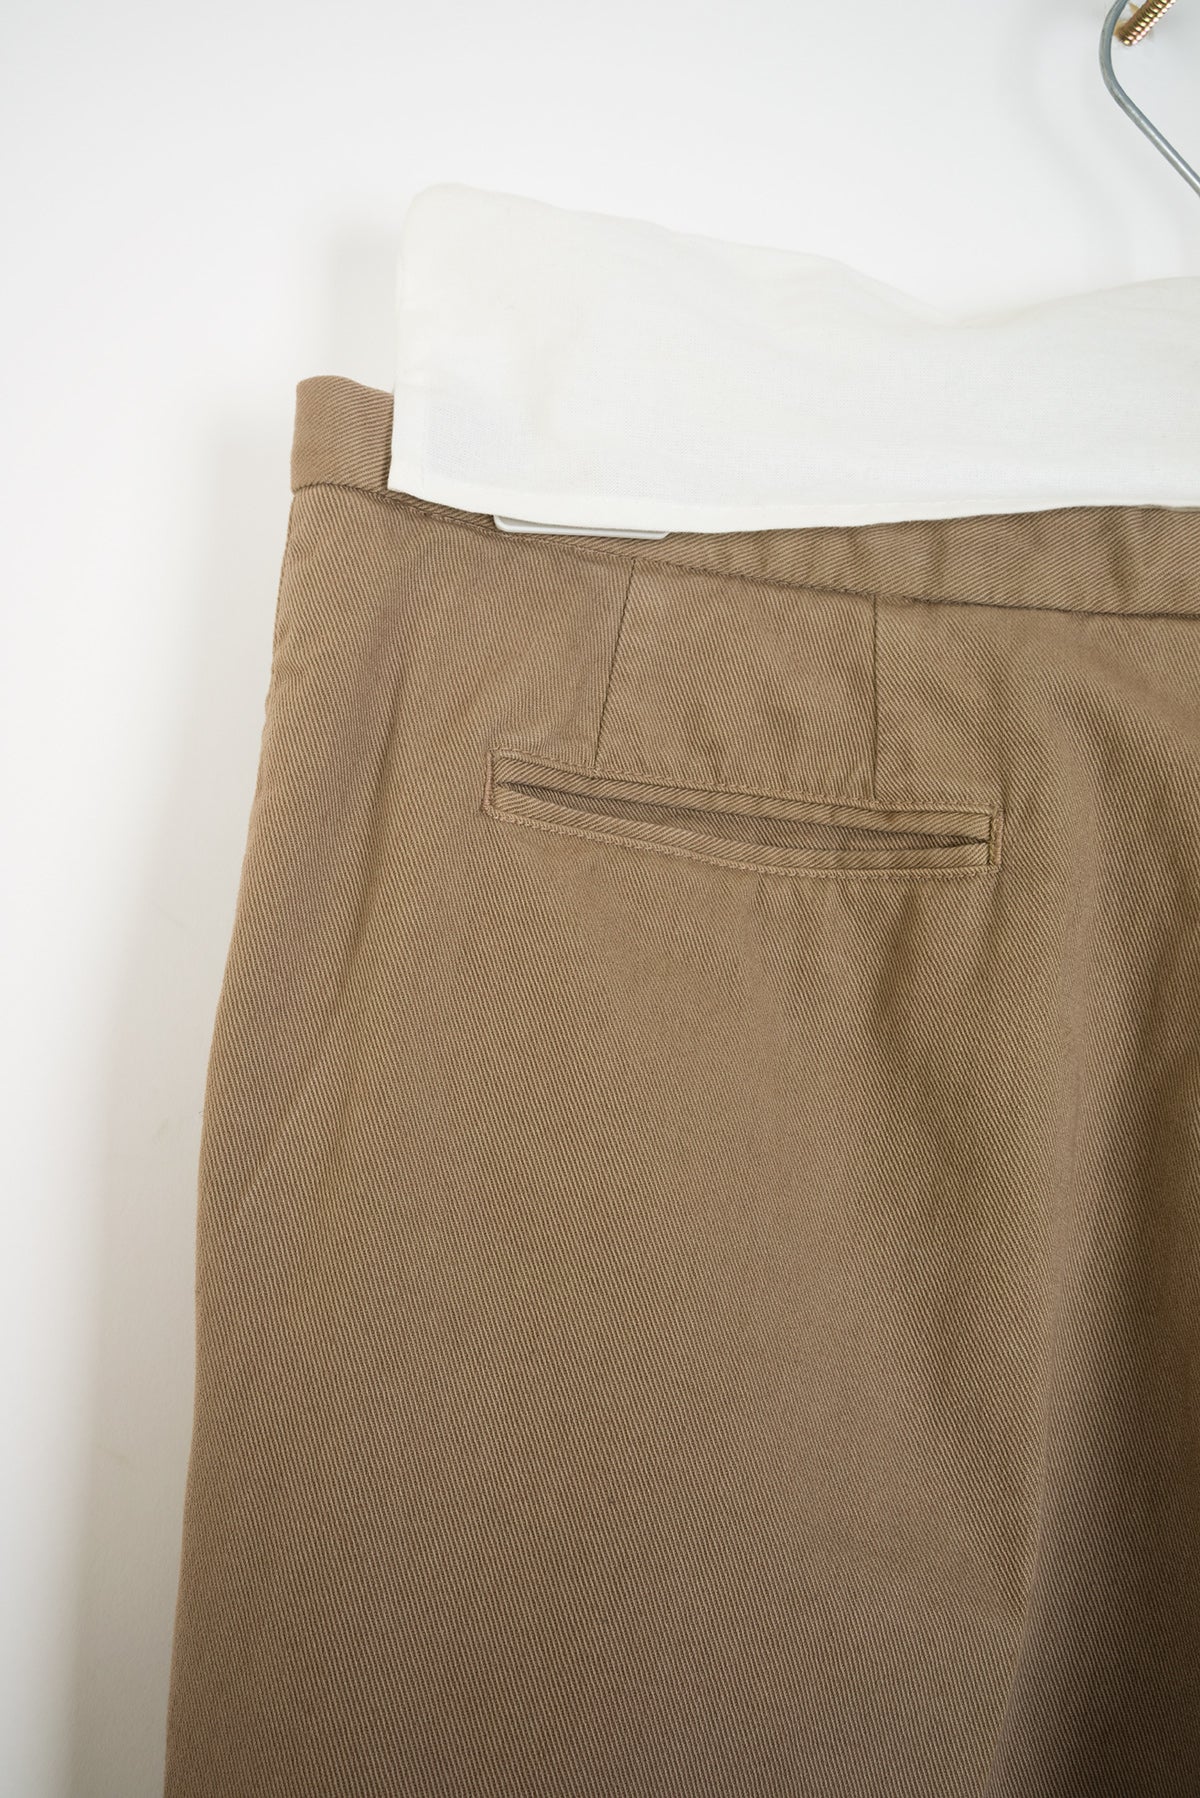 2007 A/W TROUSERS IN A HEAVY TWILL COTTON